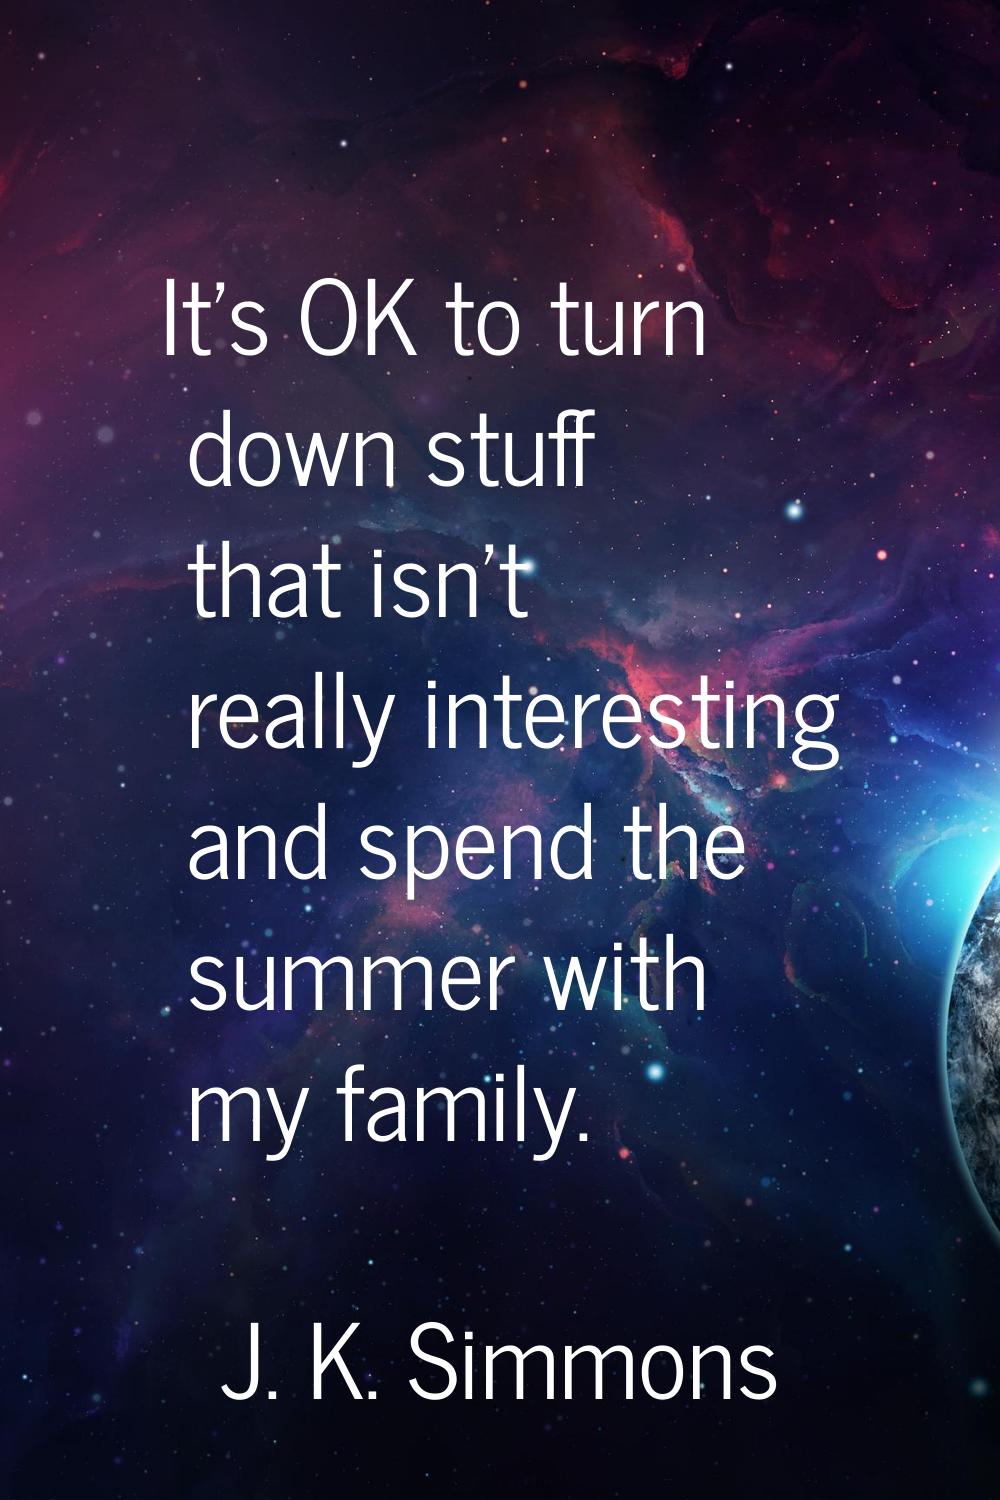 It's OK to turn down stuff that isn't really interesting and spend the summer with my family.